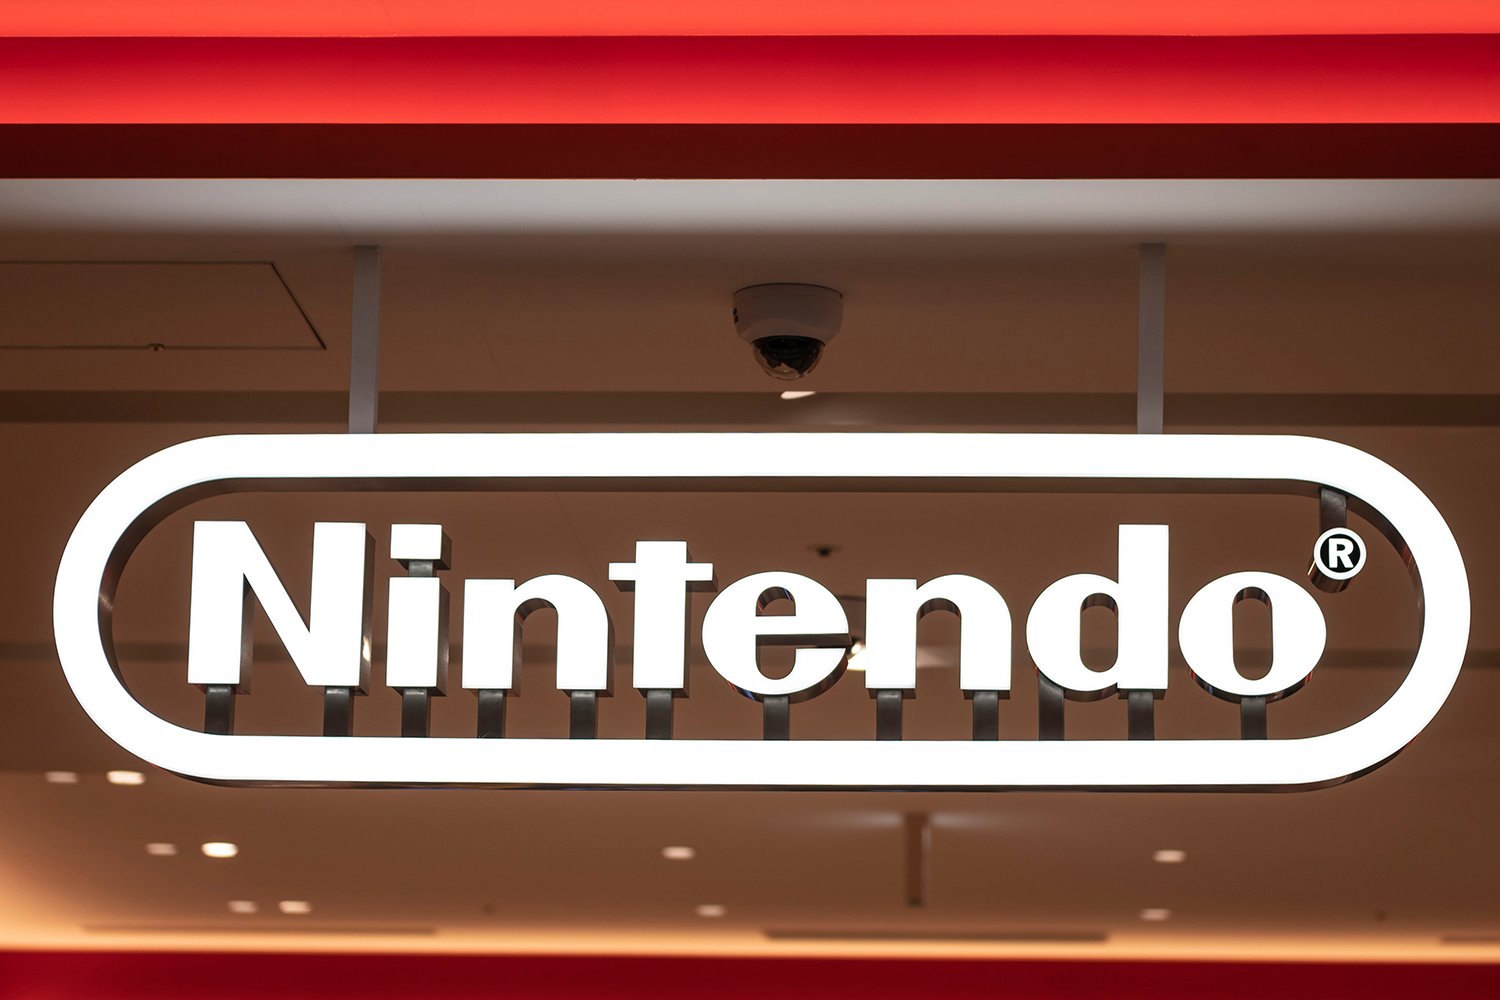 Nintendo Direct: How to Watch & What to Expect